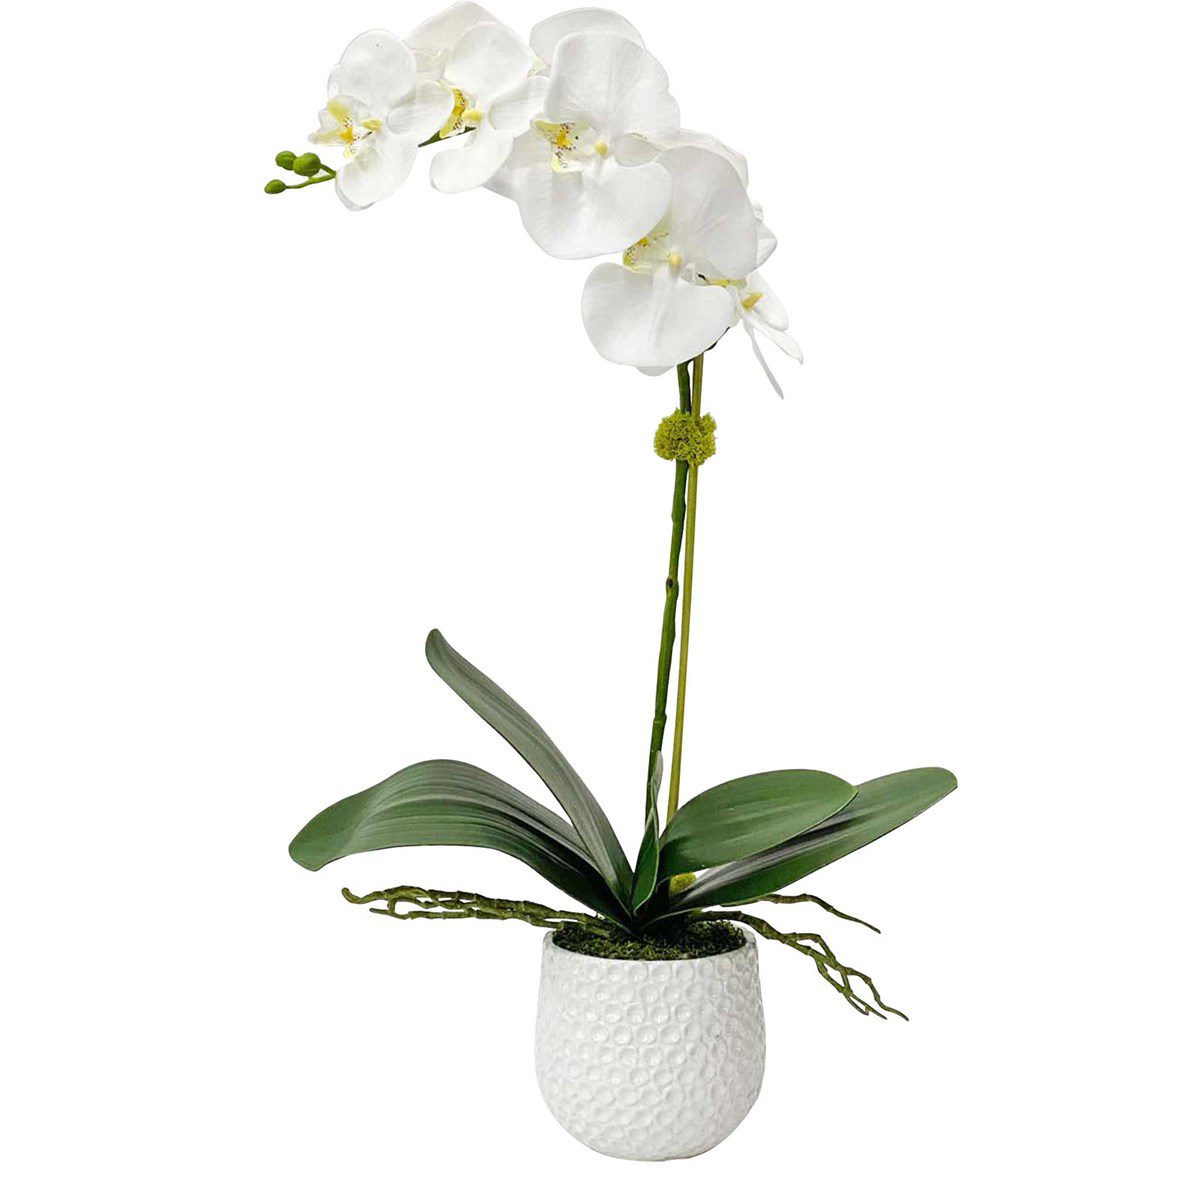 A gracefully arching stem of white orchids with reindeer moss accents over a bed of naturally preserved moss, placed in a contemporary textured white ceramic pot. Container is 4.5" W x 4.5" H x 4.5" D.